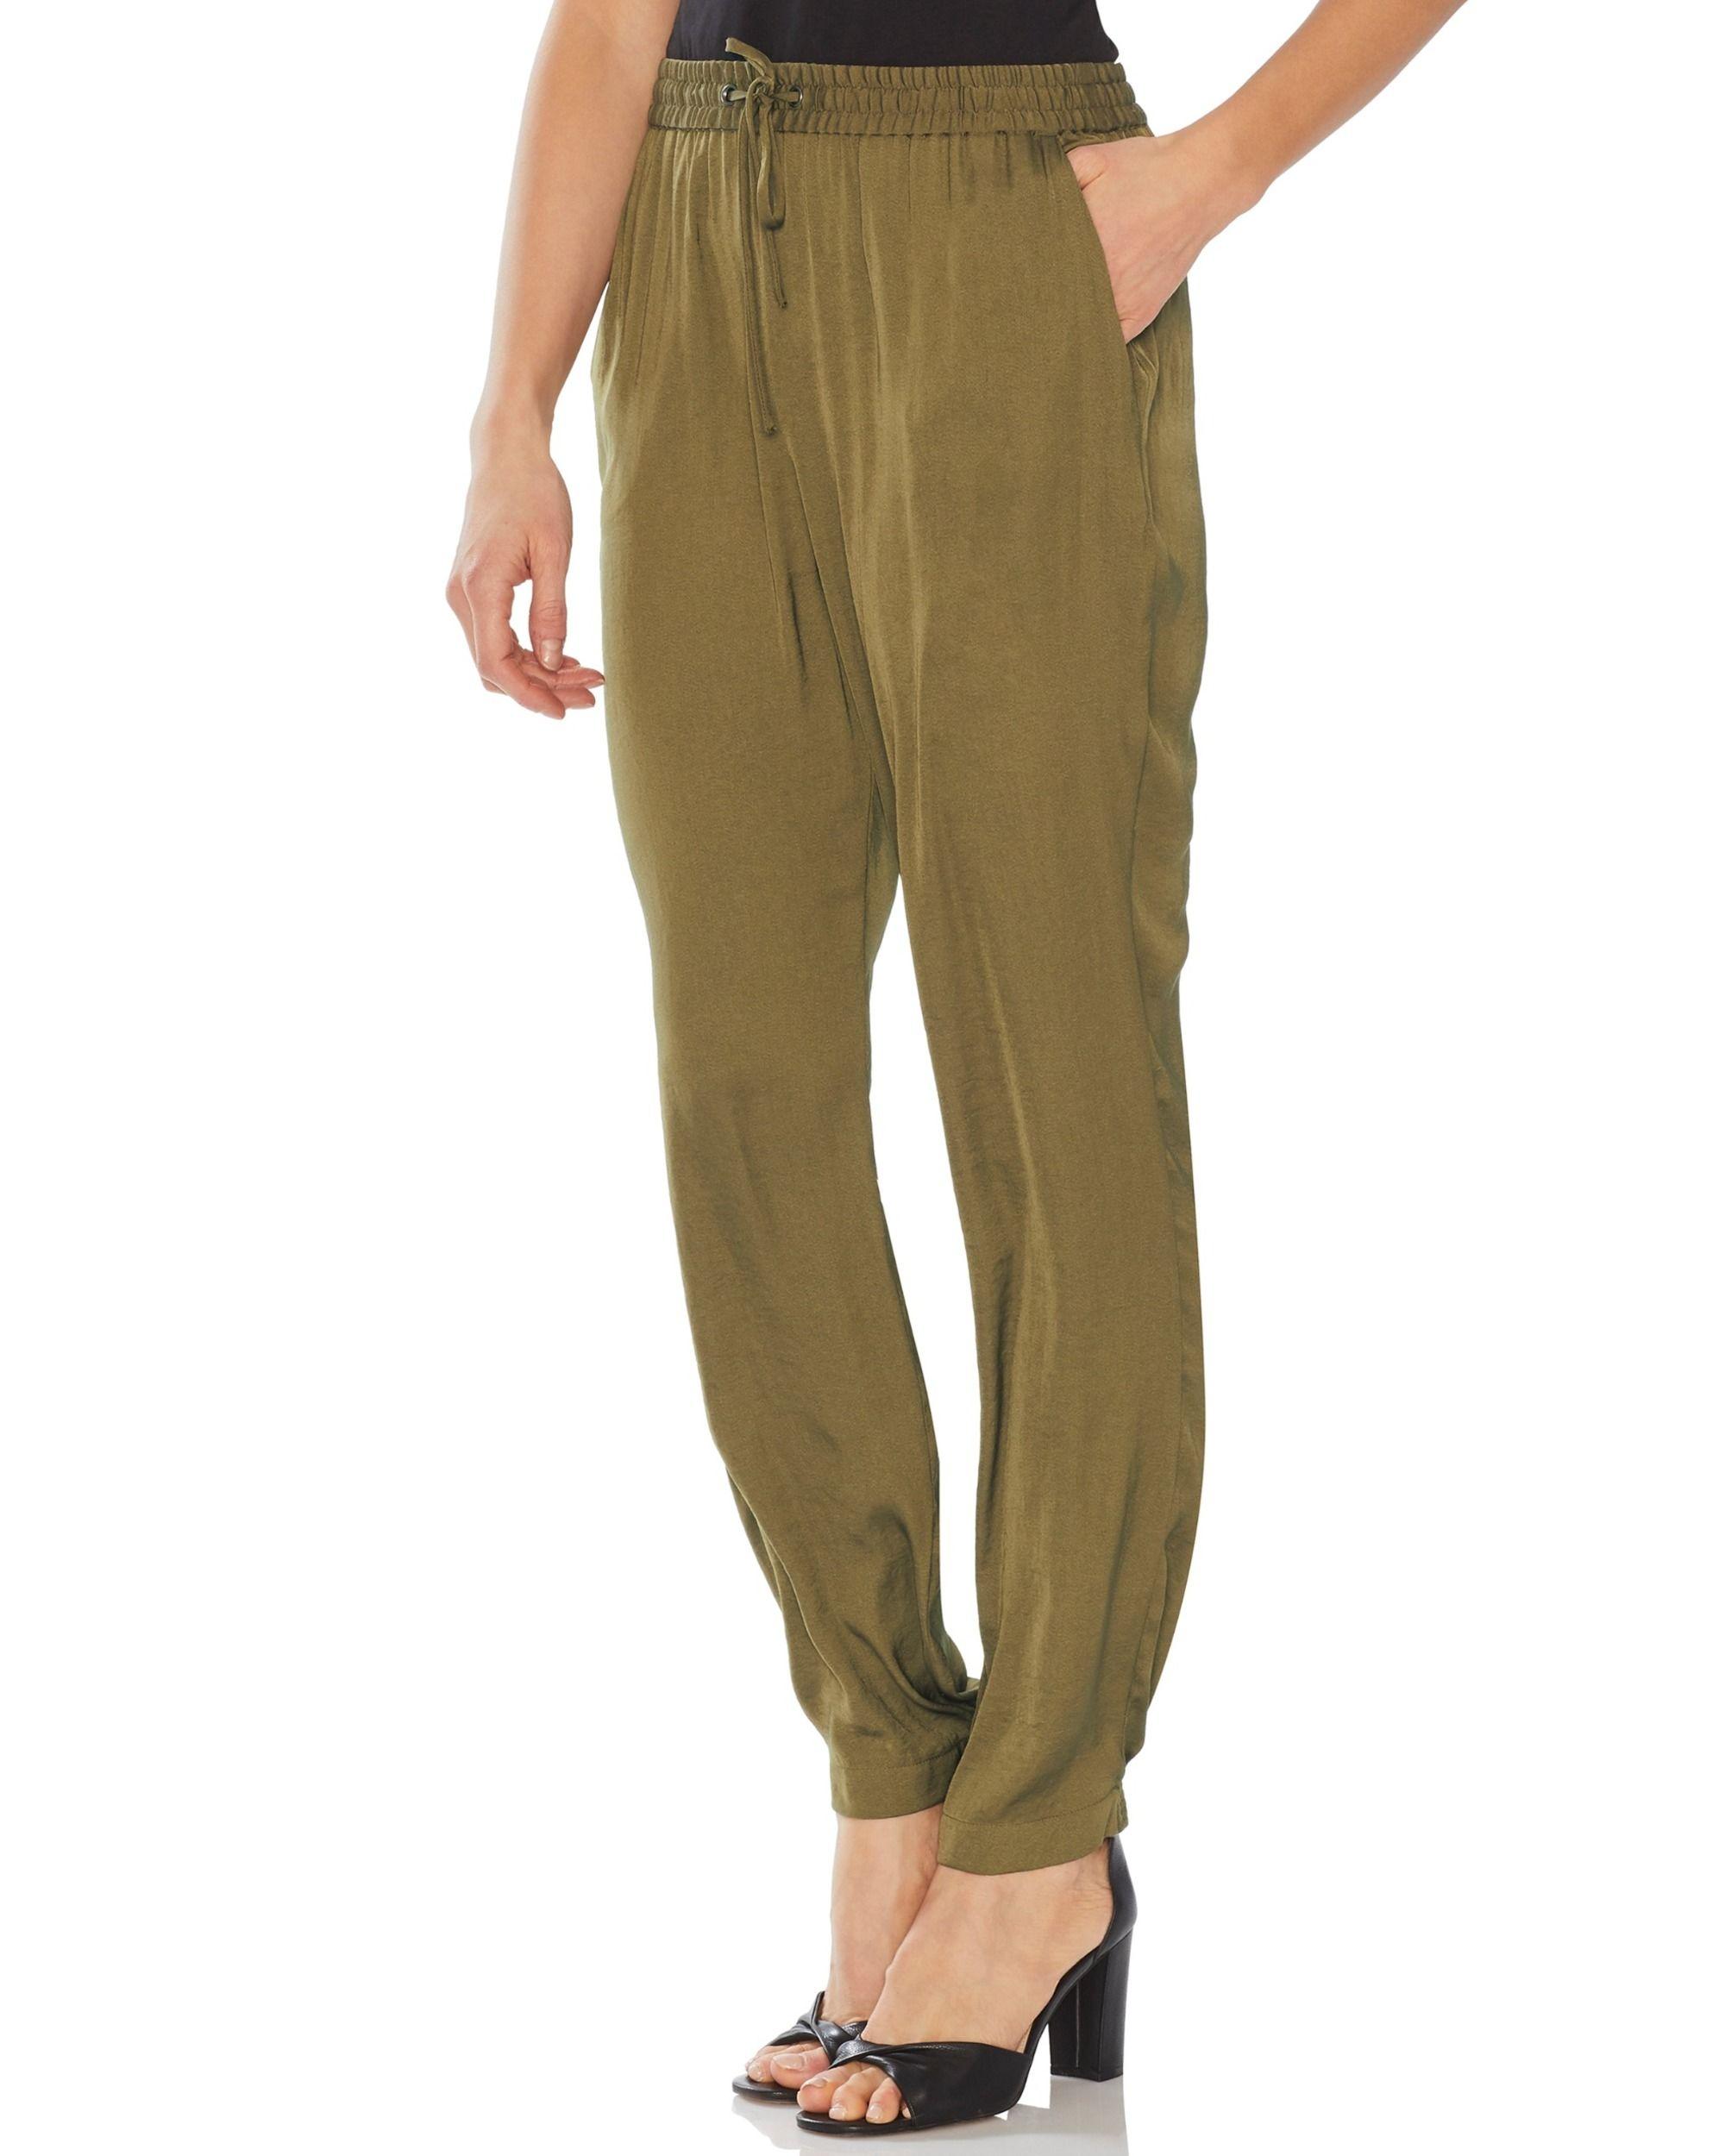 Vince Camuto Satin Textured Drawstring Pants in Green - Lyst